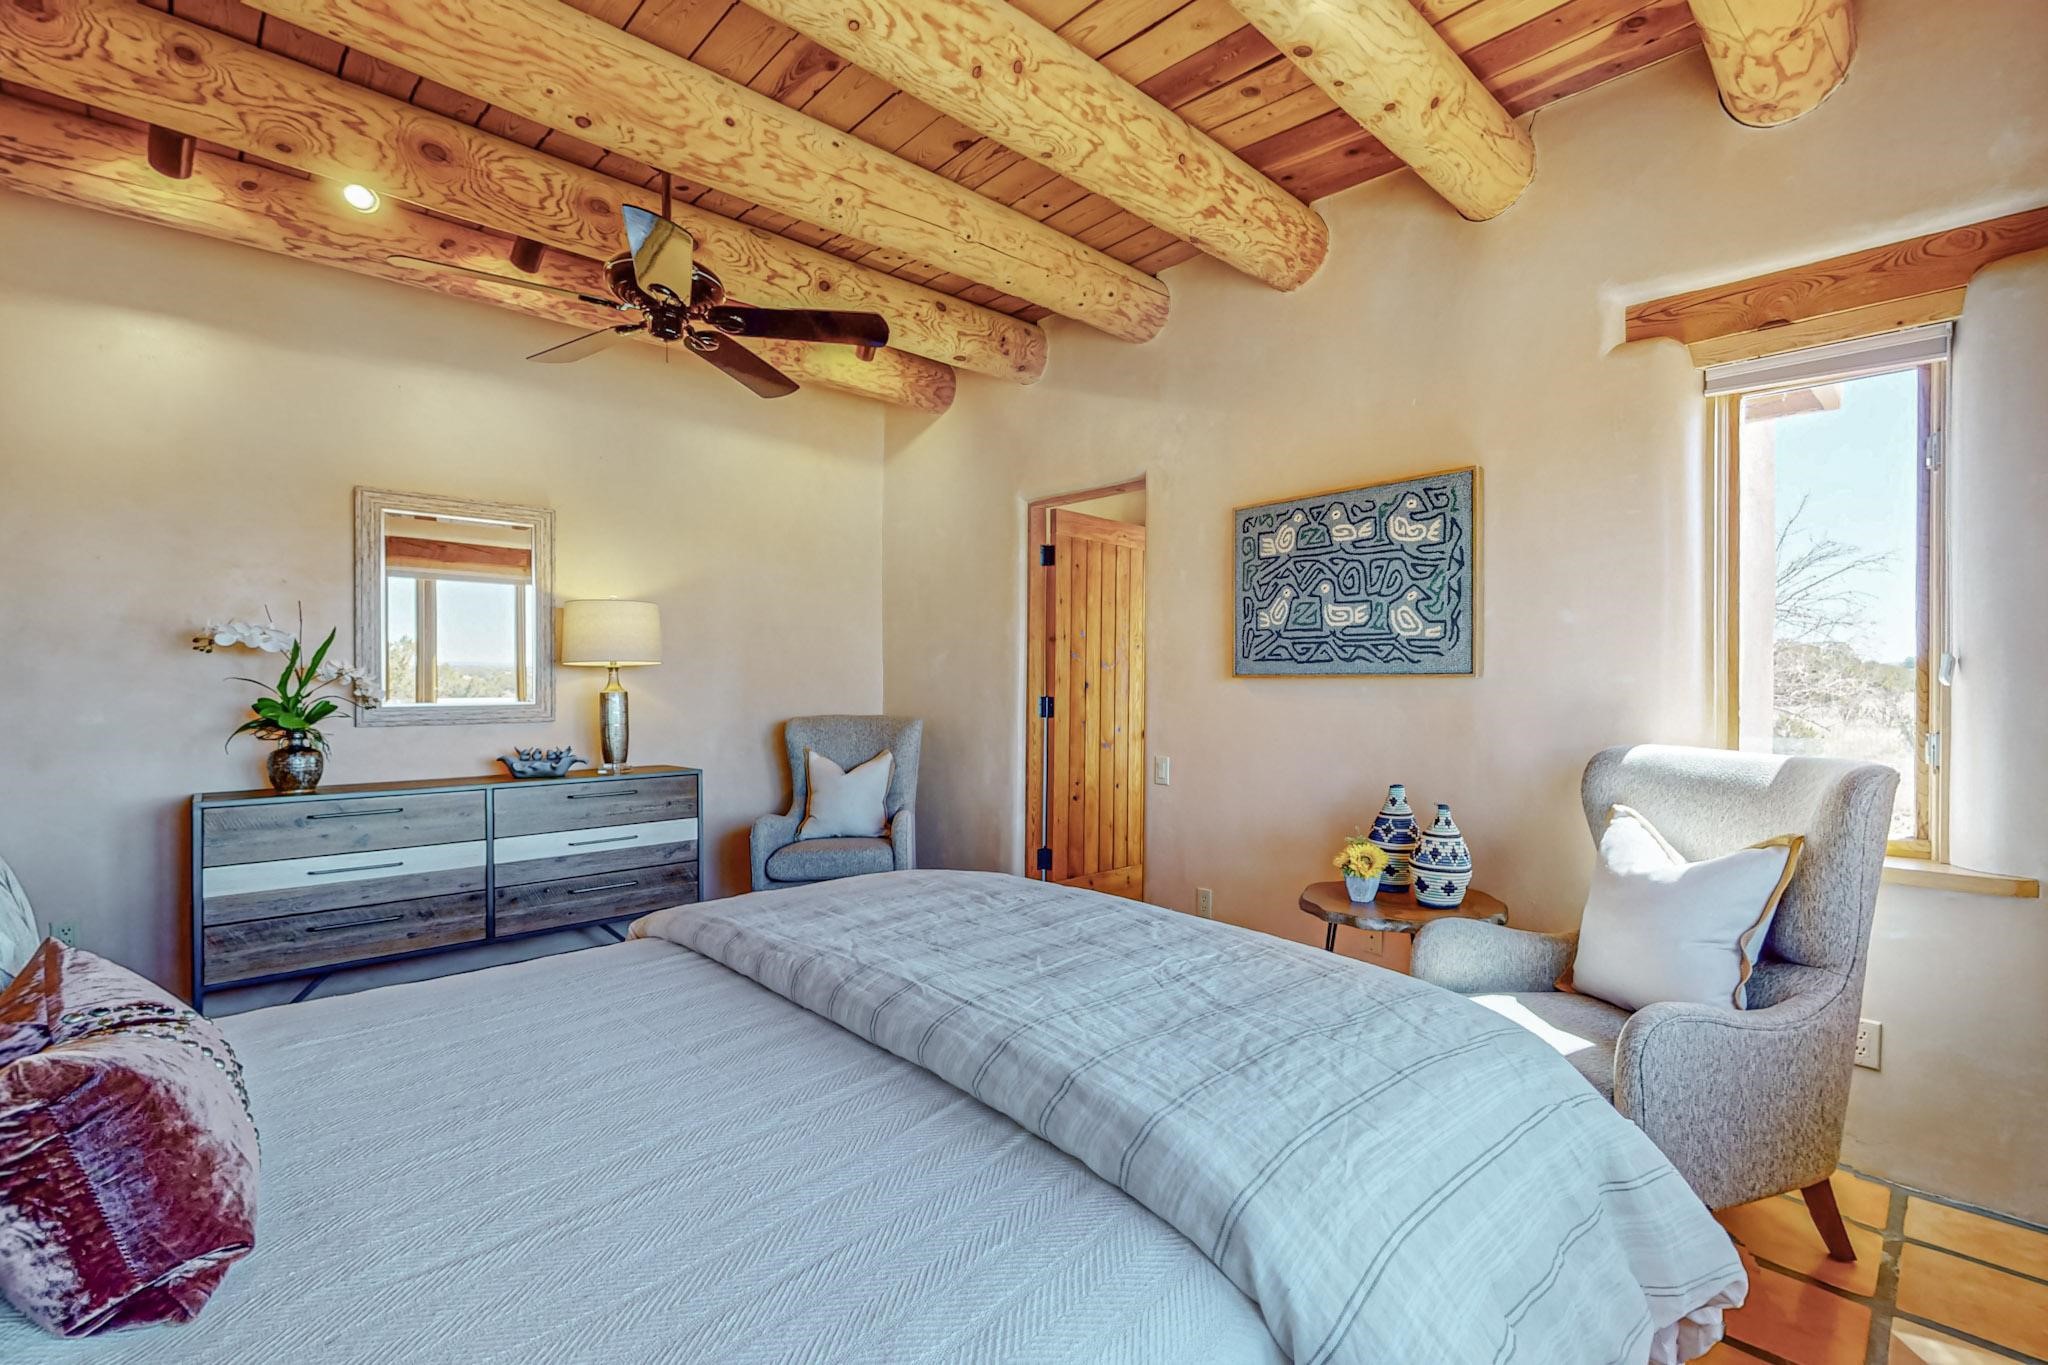 8 Aguila Place, Santa Fe, New Mexico 87508, 3 Bedrooms Bedrooms, ,2 BathroomsBathrooms,Residential,For Sale,8 Aguila Place,202401080